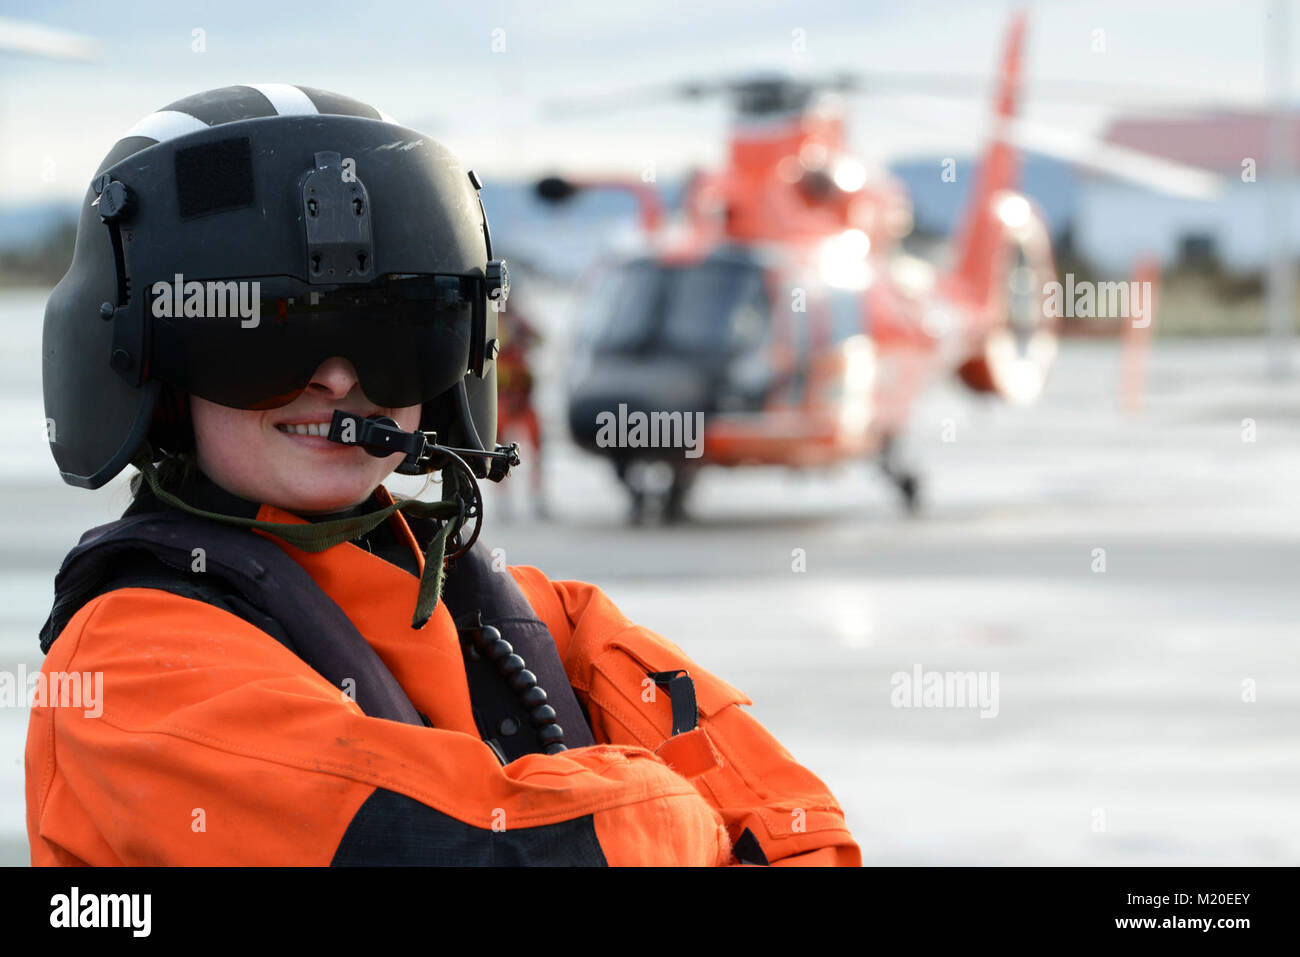 Coast Guard Petty Officer 3rd Class Amber Brewer, an aviation maintenance technician, Air Station Port Angeles, Wash., poses for a picture on the the flight line in front of an MH-65 Dolphin Helicopter, Jan. 26, 2018.    Brewer not only maintains the readiness of the aircraft, but is also a qualified flight mechanic responsible for overseeing the mechanical safety of the helicopter and conducting the essential hoisting operations conducted during rescue swimmer deployments.    U.S. Coast Guard Stock Photo